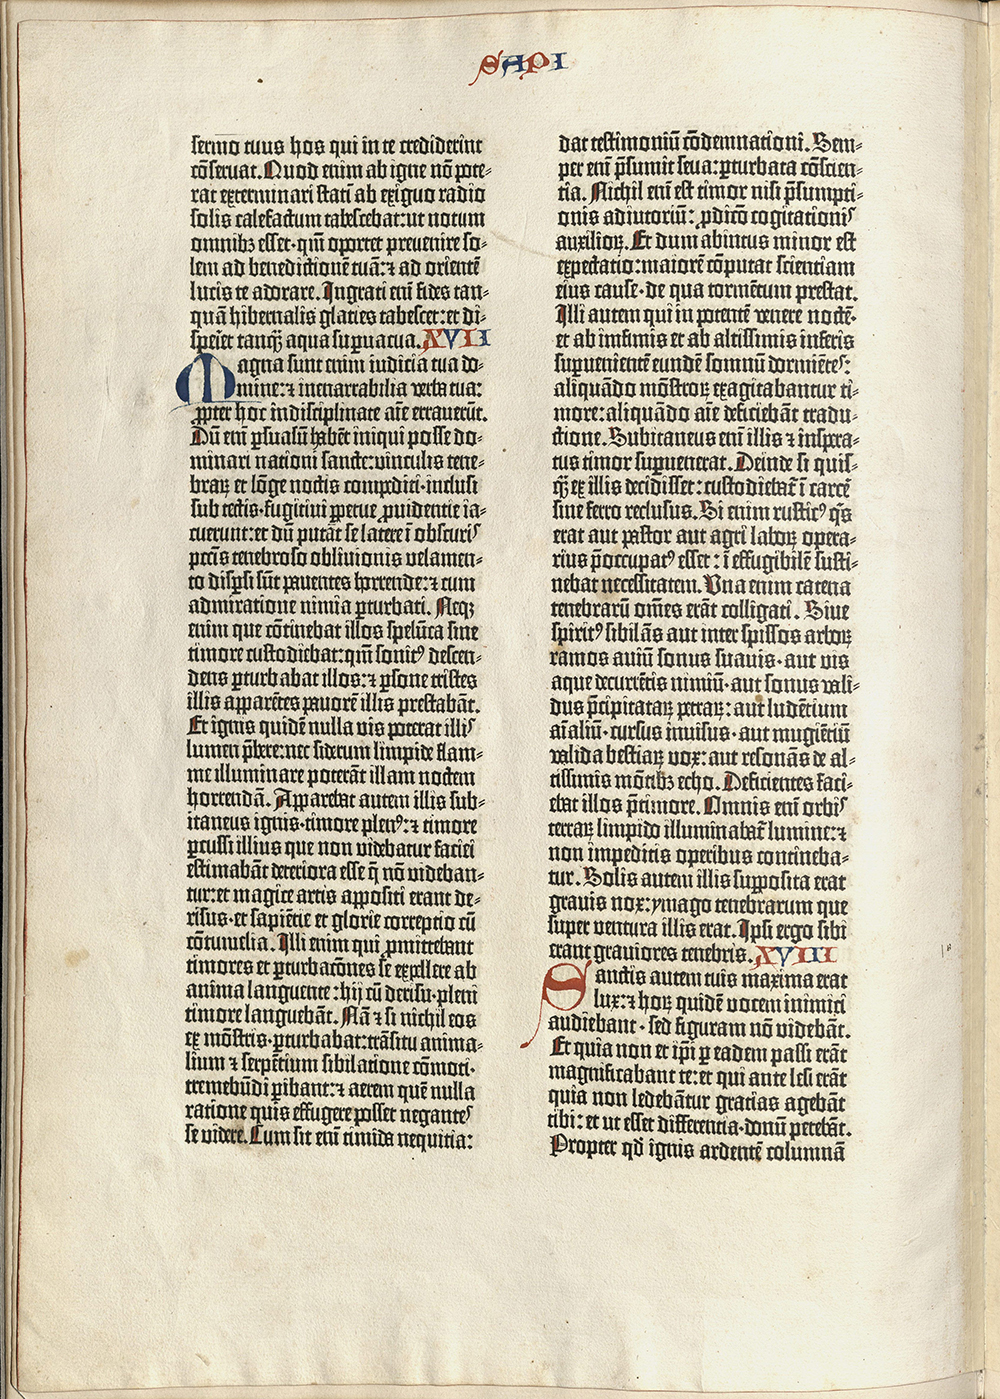 Leaf from the Gutenberg Bible